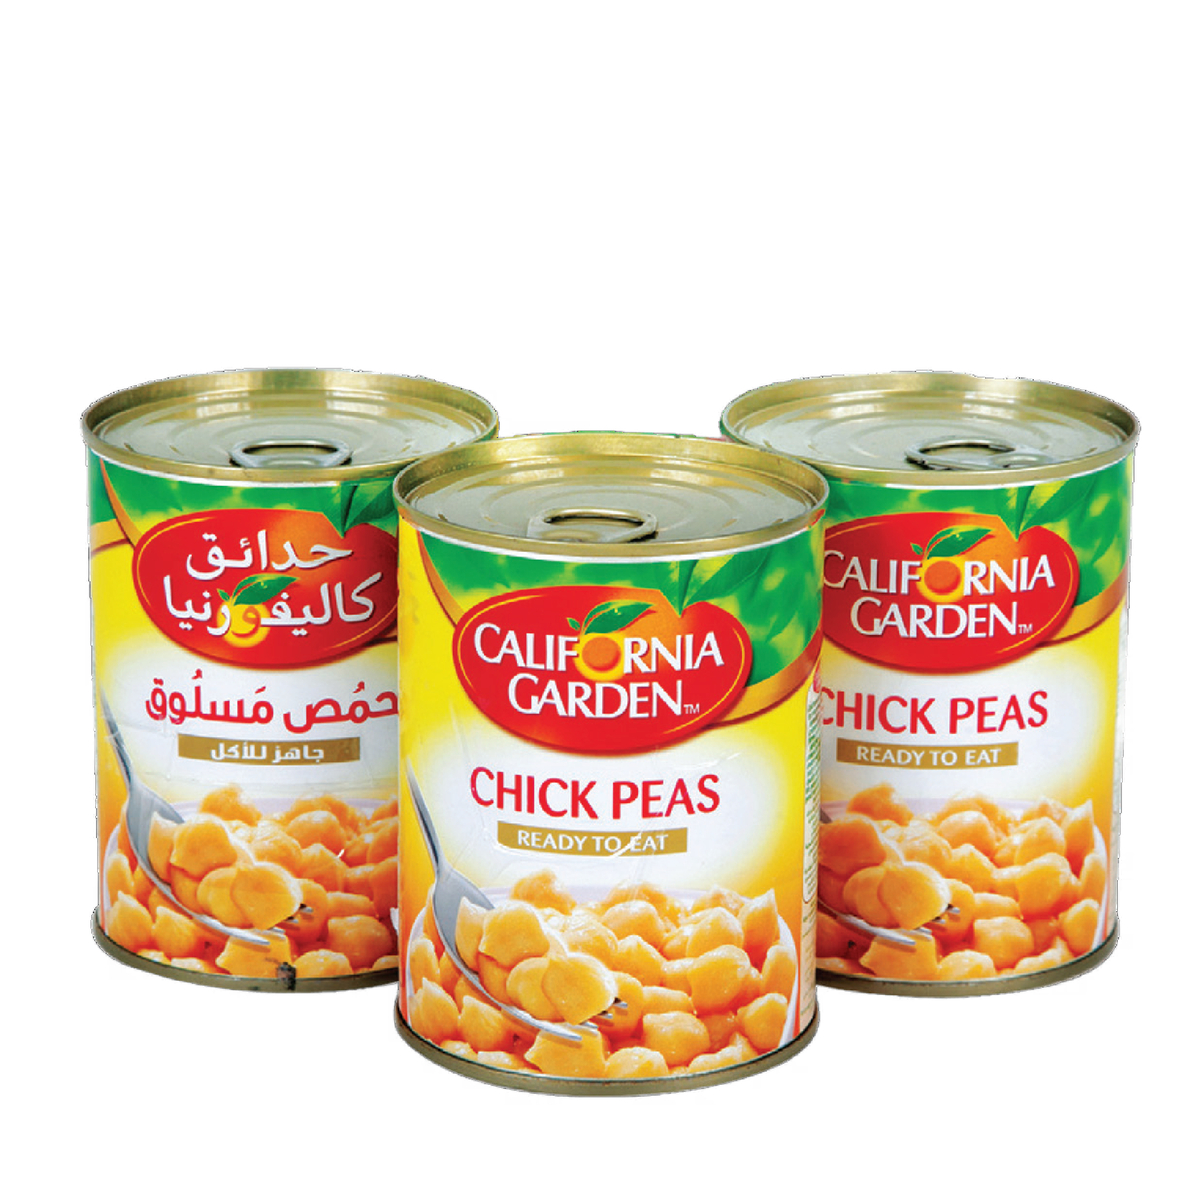 California Garden Canned Chickpeas Ready To Eat 3 x 400 g